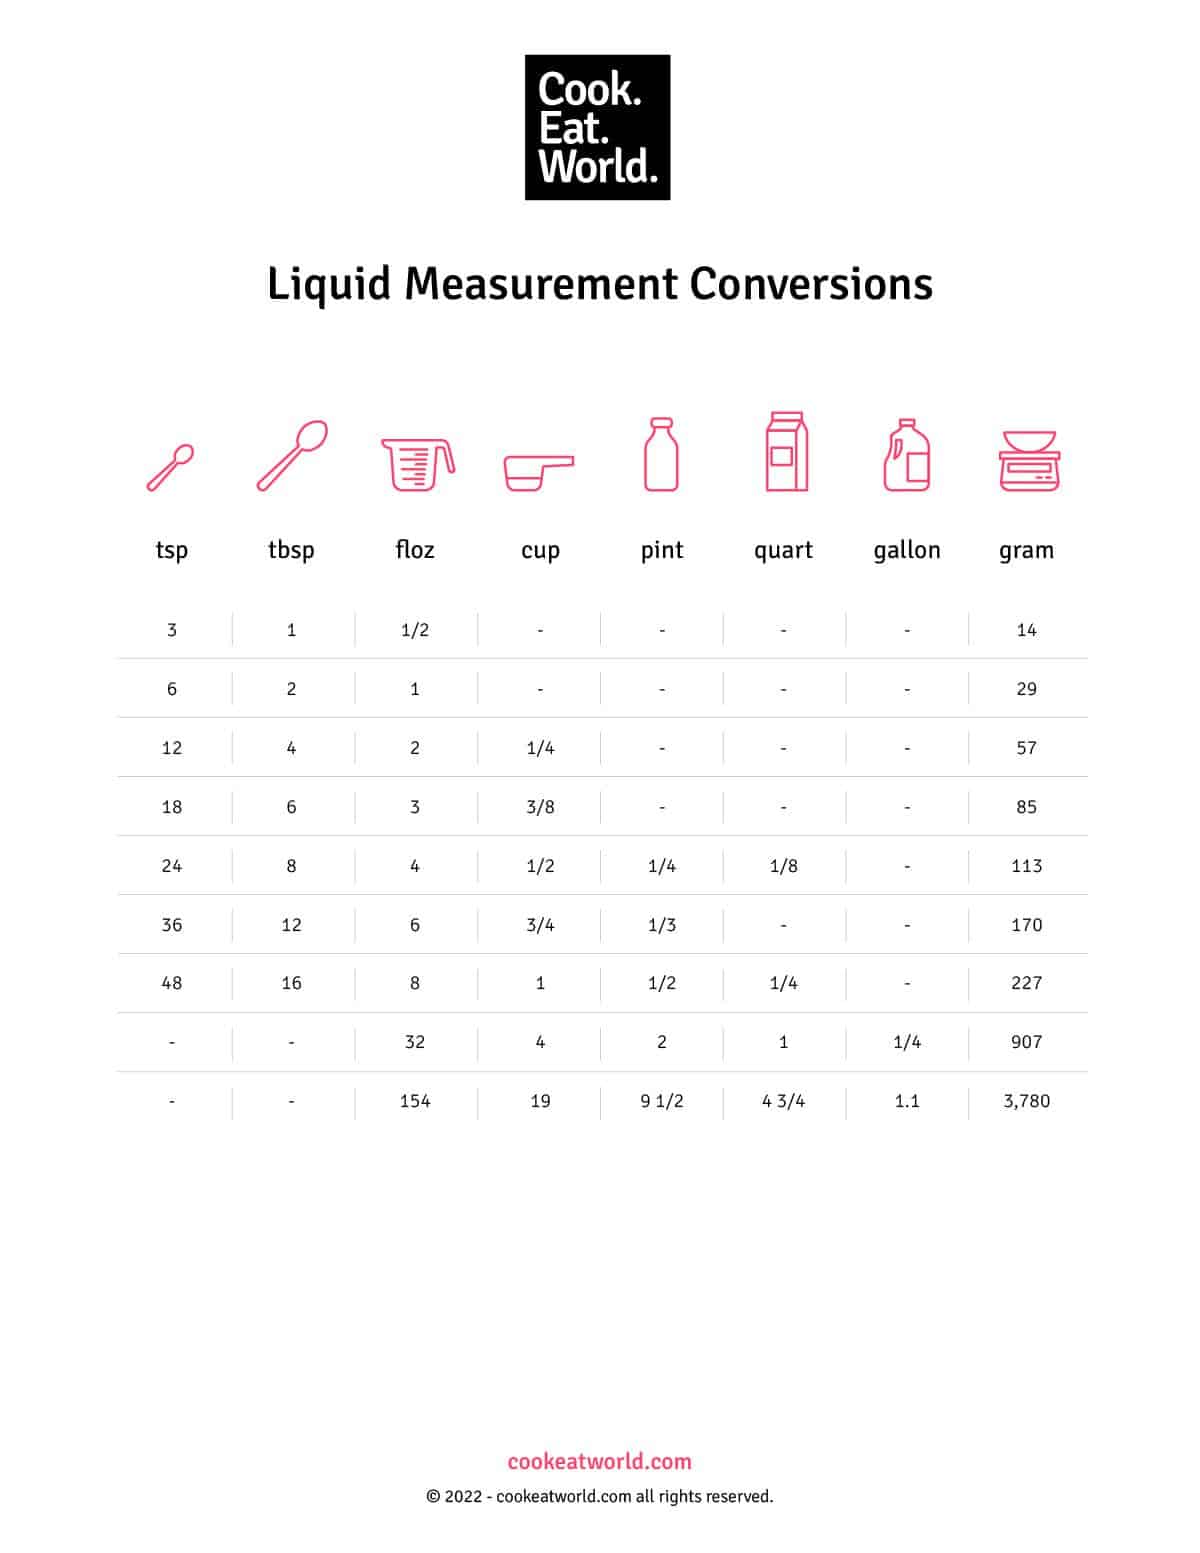 Kitchen conversion chart from cookeatworld.com